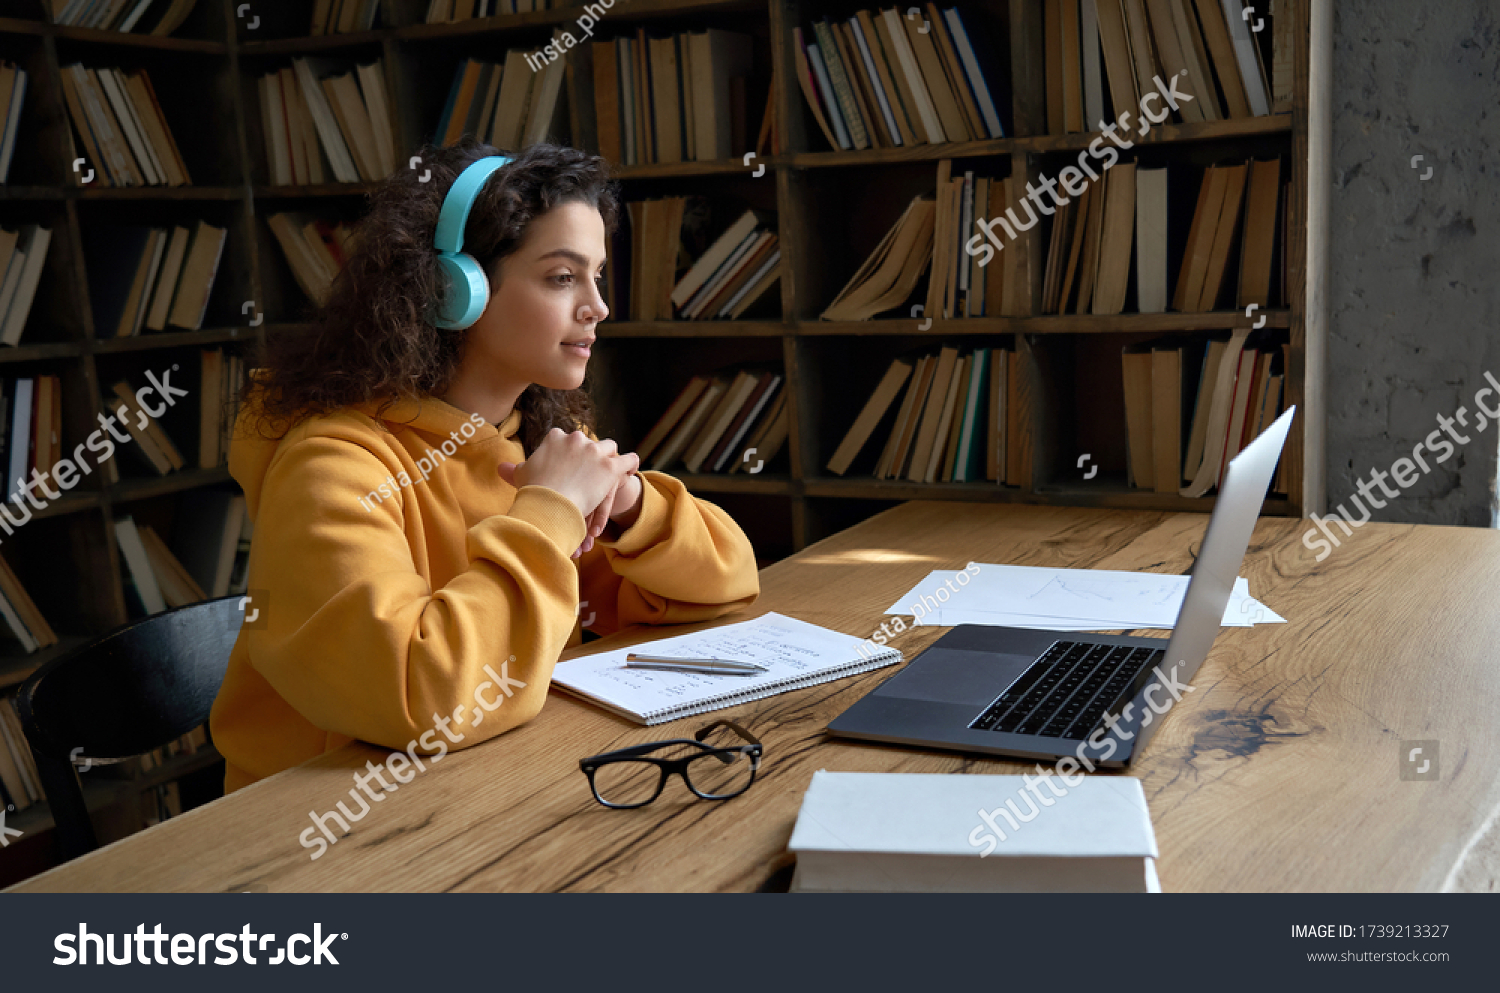 Hispanic teen girl, latin young woman school college student wear headphones learn watching online webinar webcast class looking at laptop elearning distance course or video calling remote teacher. #1739213327